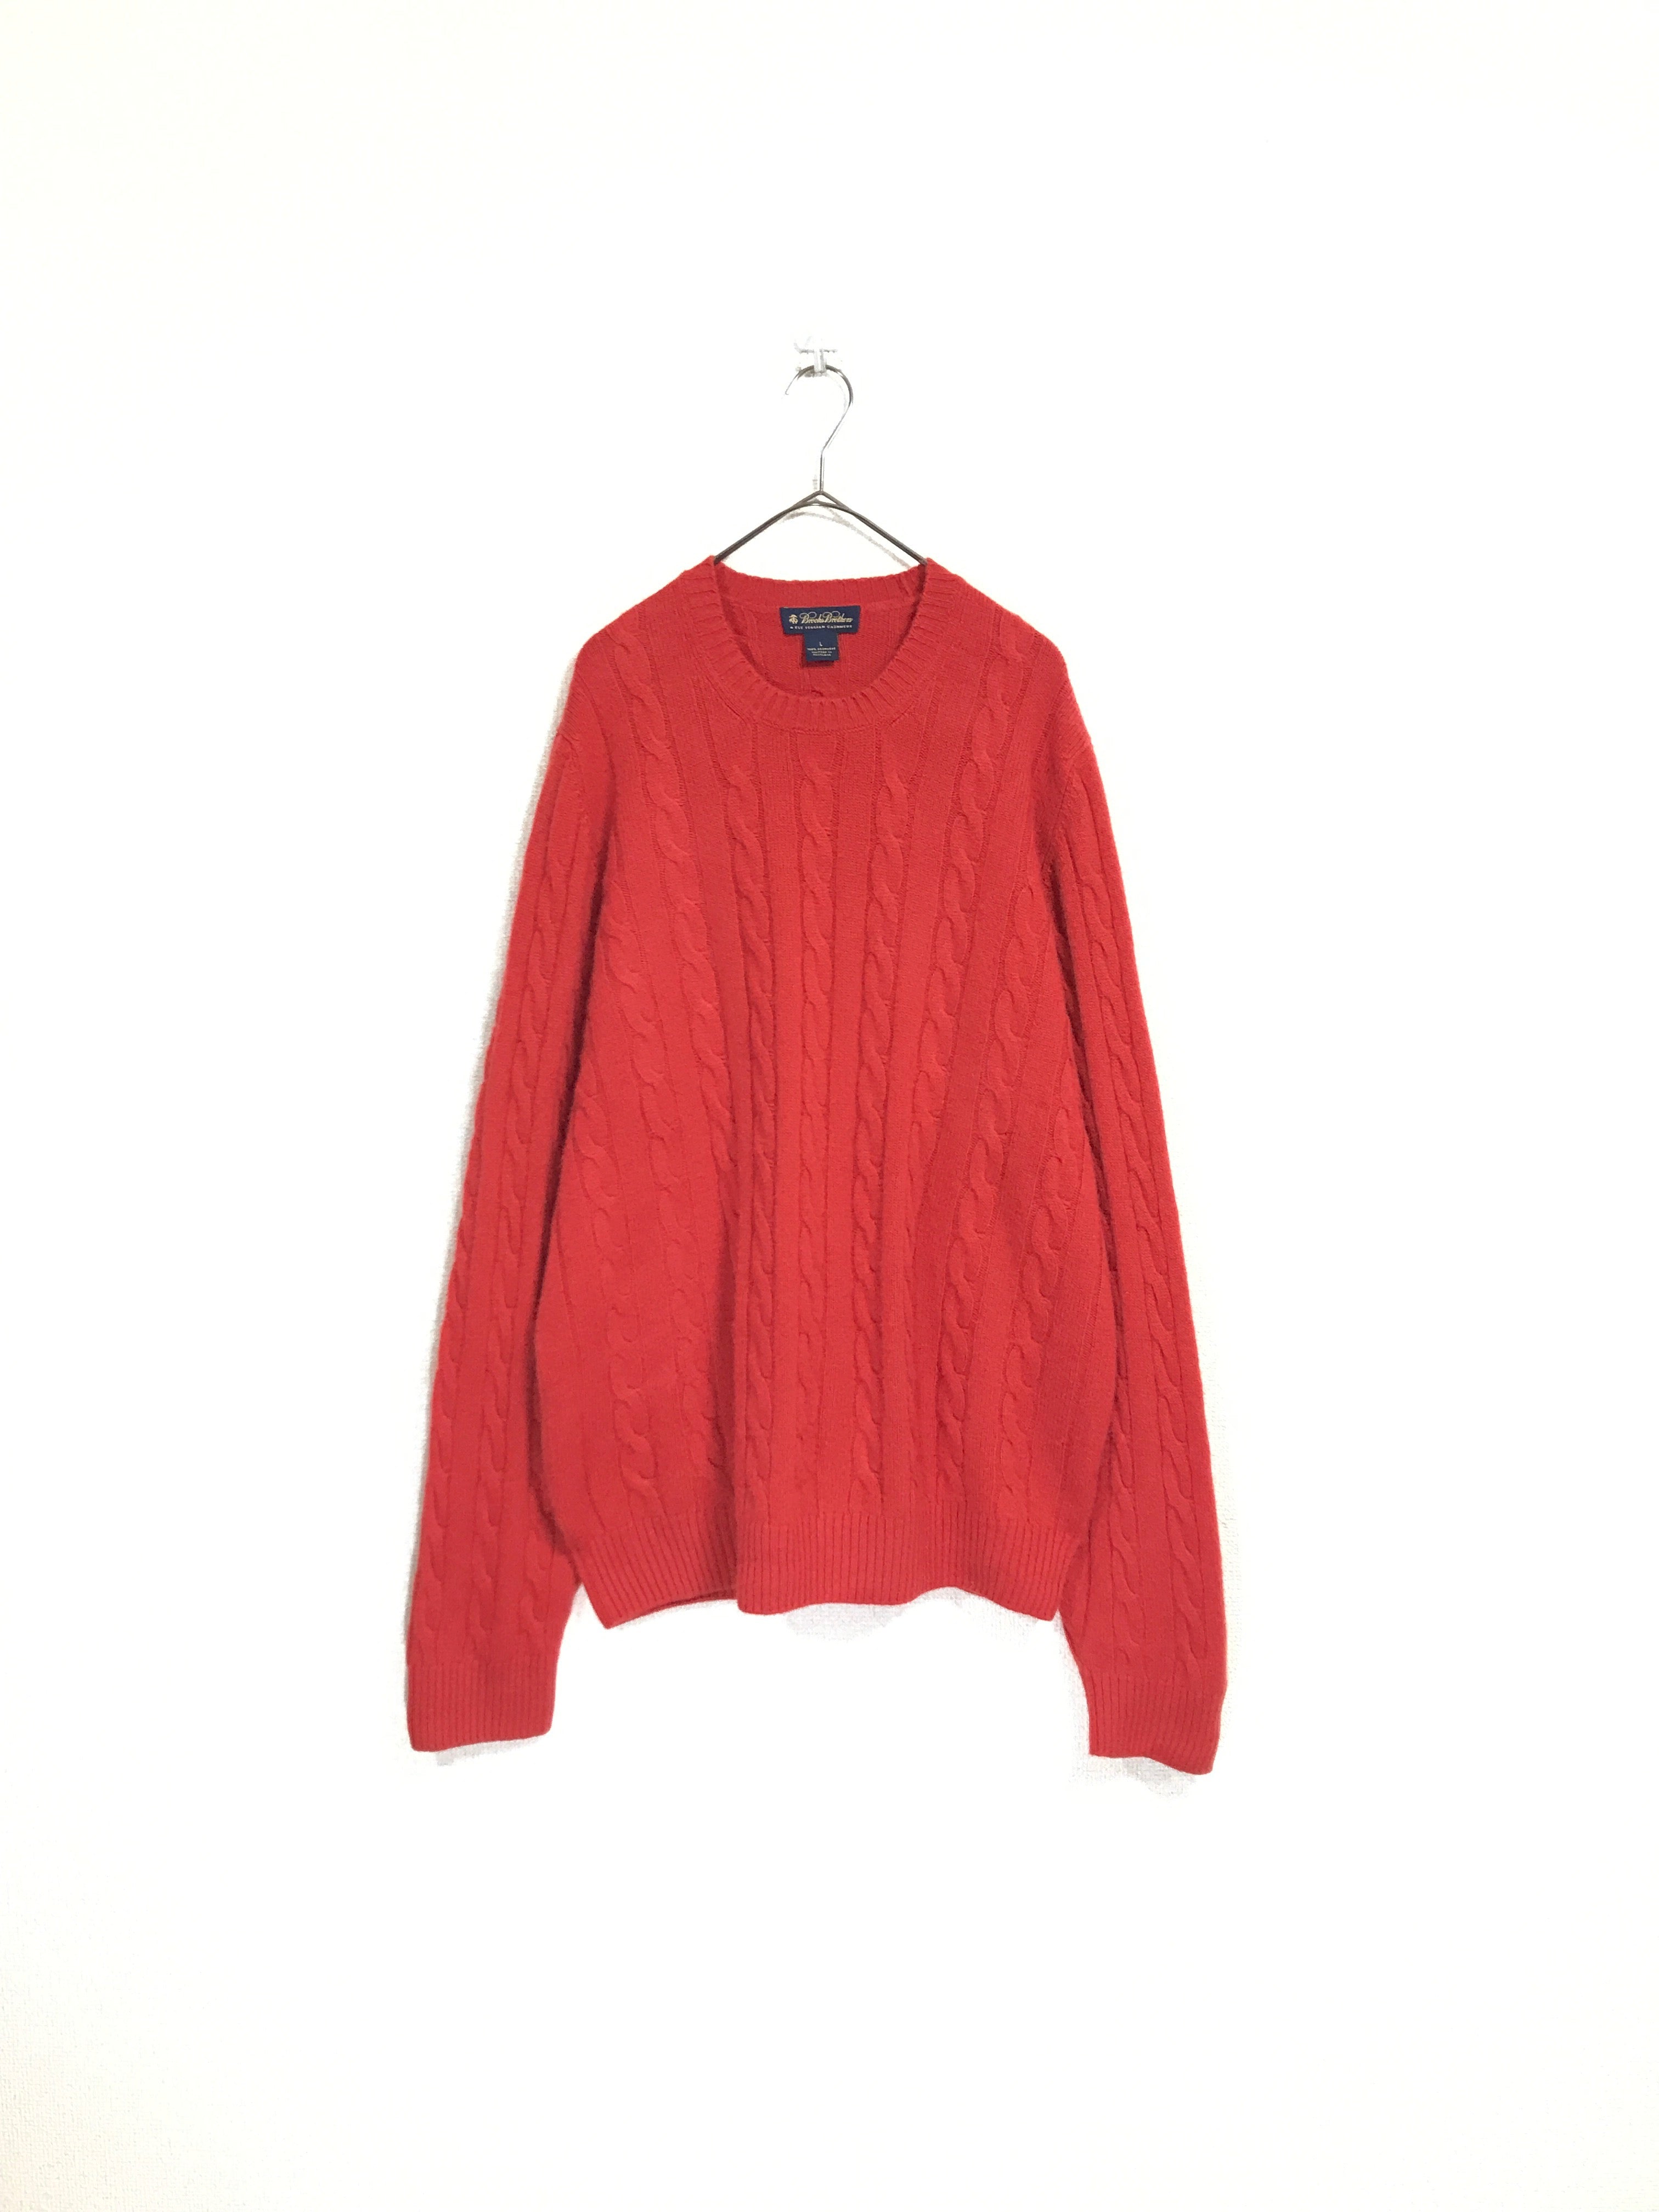 4-PLY cashmere cable knit sweater